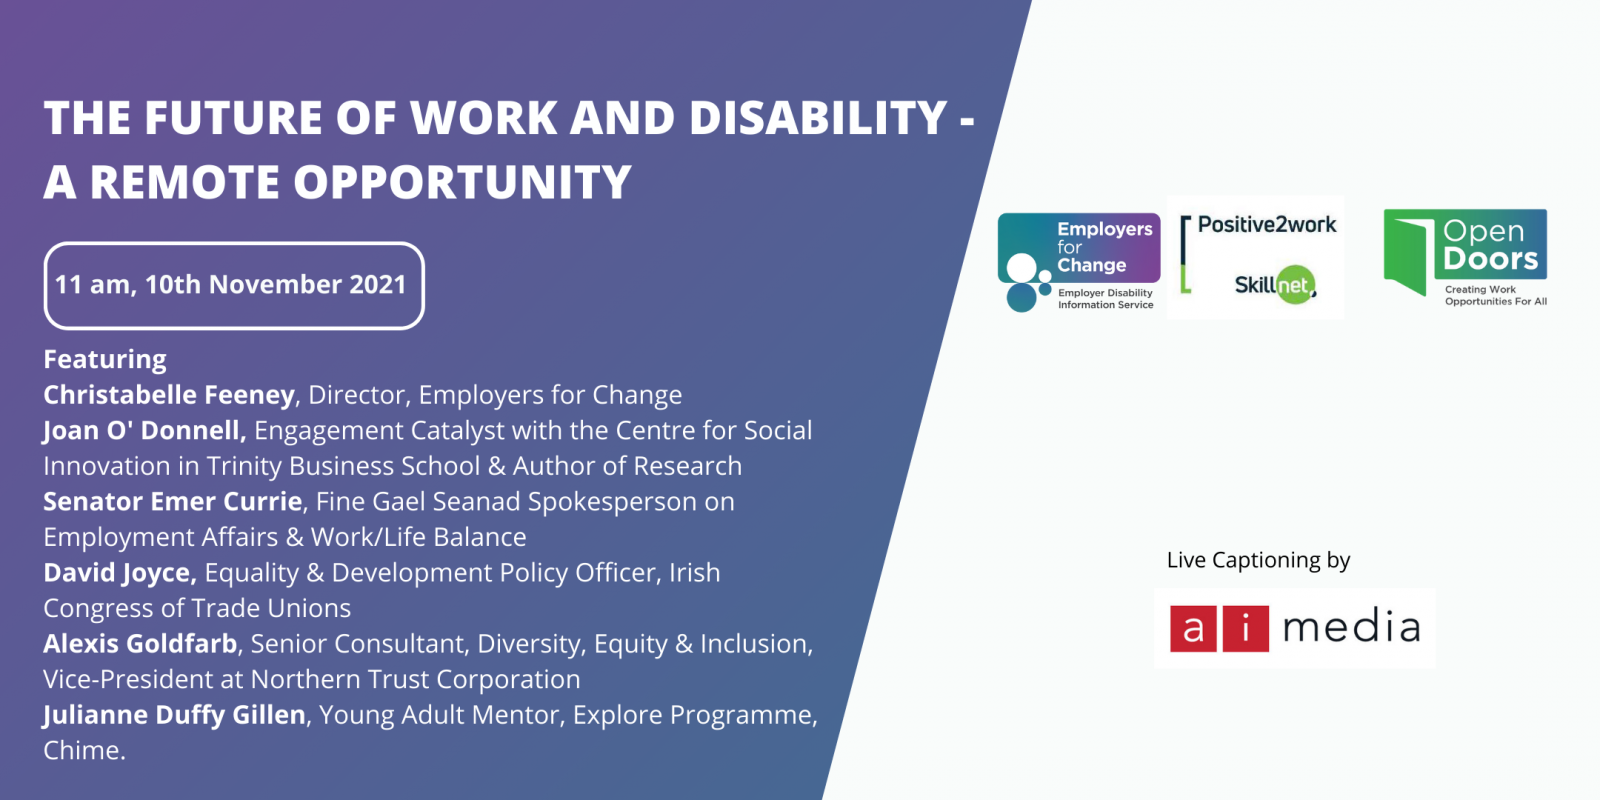 Purple rectangle with white text fabout the event. Details as per the main body content of this section. On the right there is an Employers for Change logo, Psoitive2Work Skillnet and Open Doors logo on a white background with Live Captioning by ai media below, 